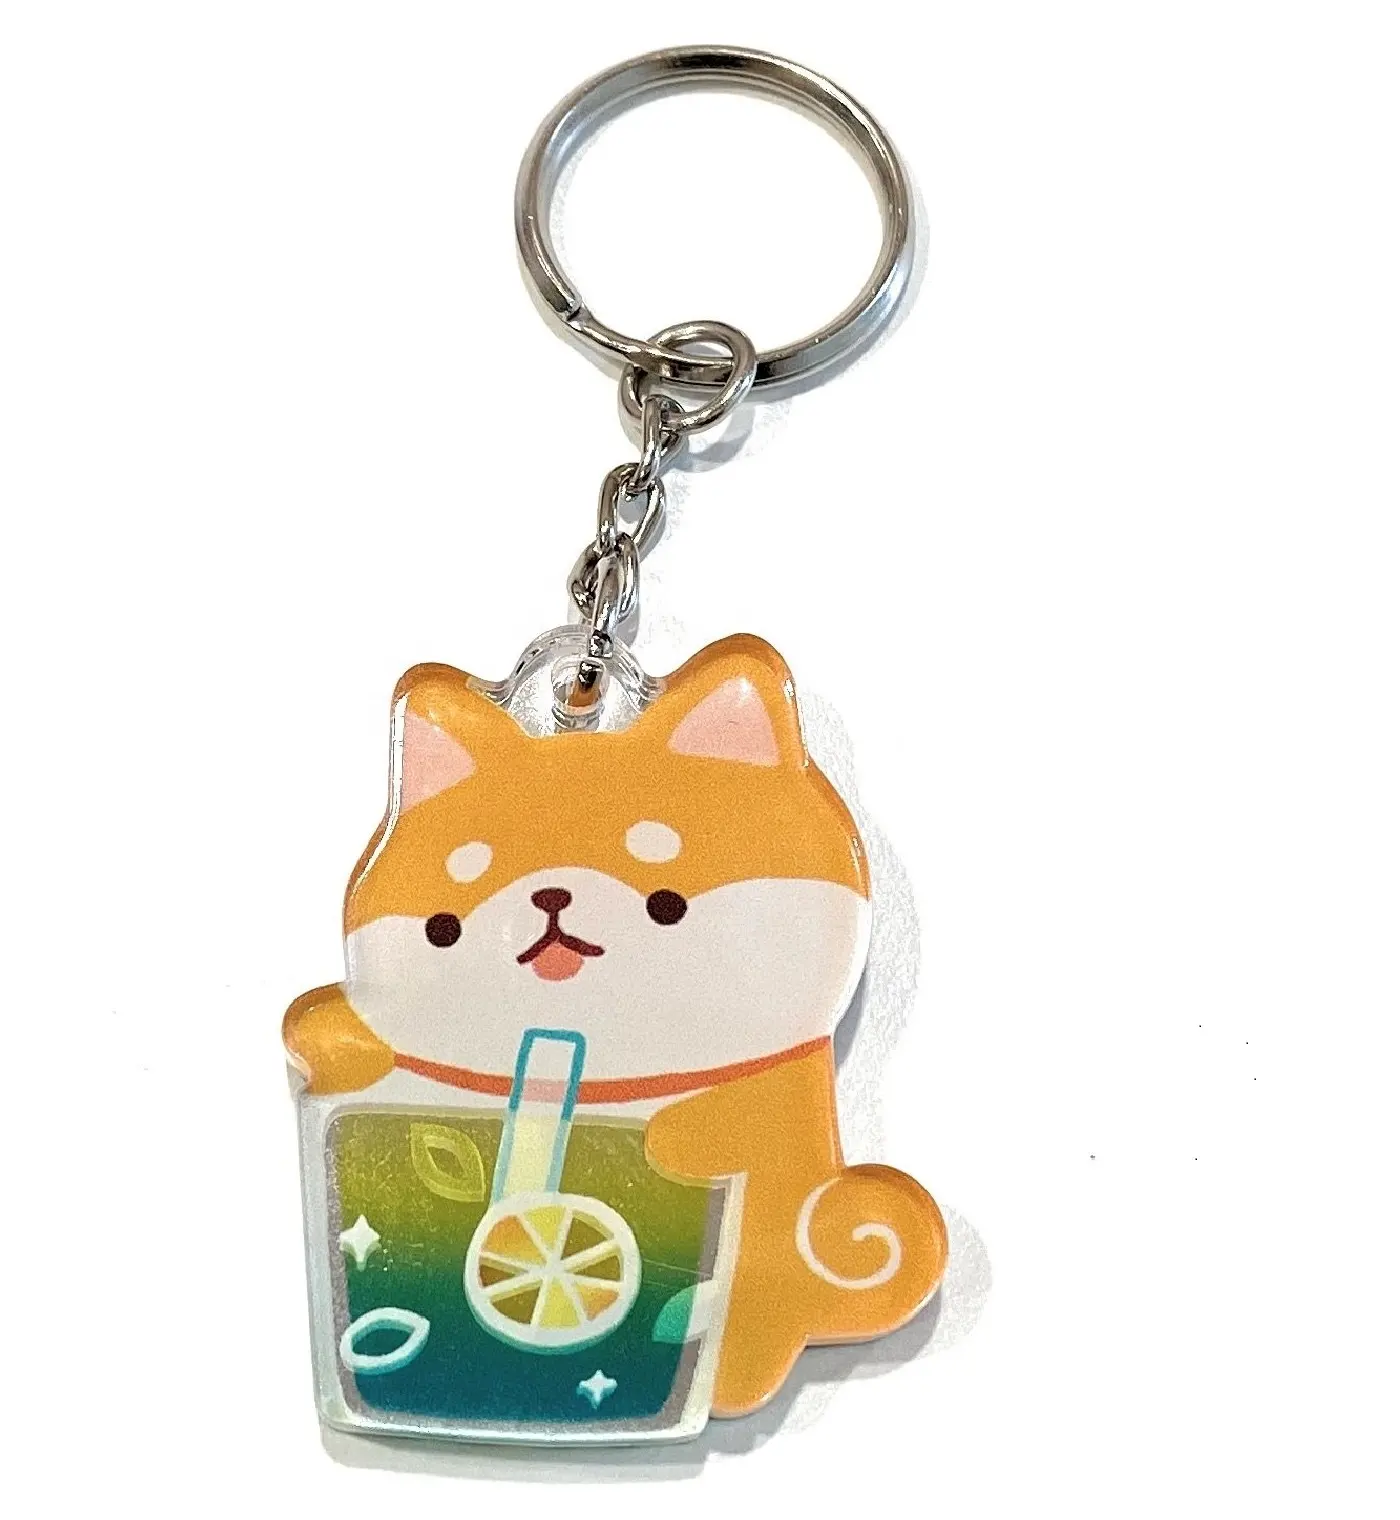 Promotional Giveaway Products Multi Purpose Pocket Mirror Acrylic Keychain Small Gift for Kids